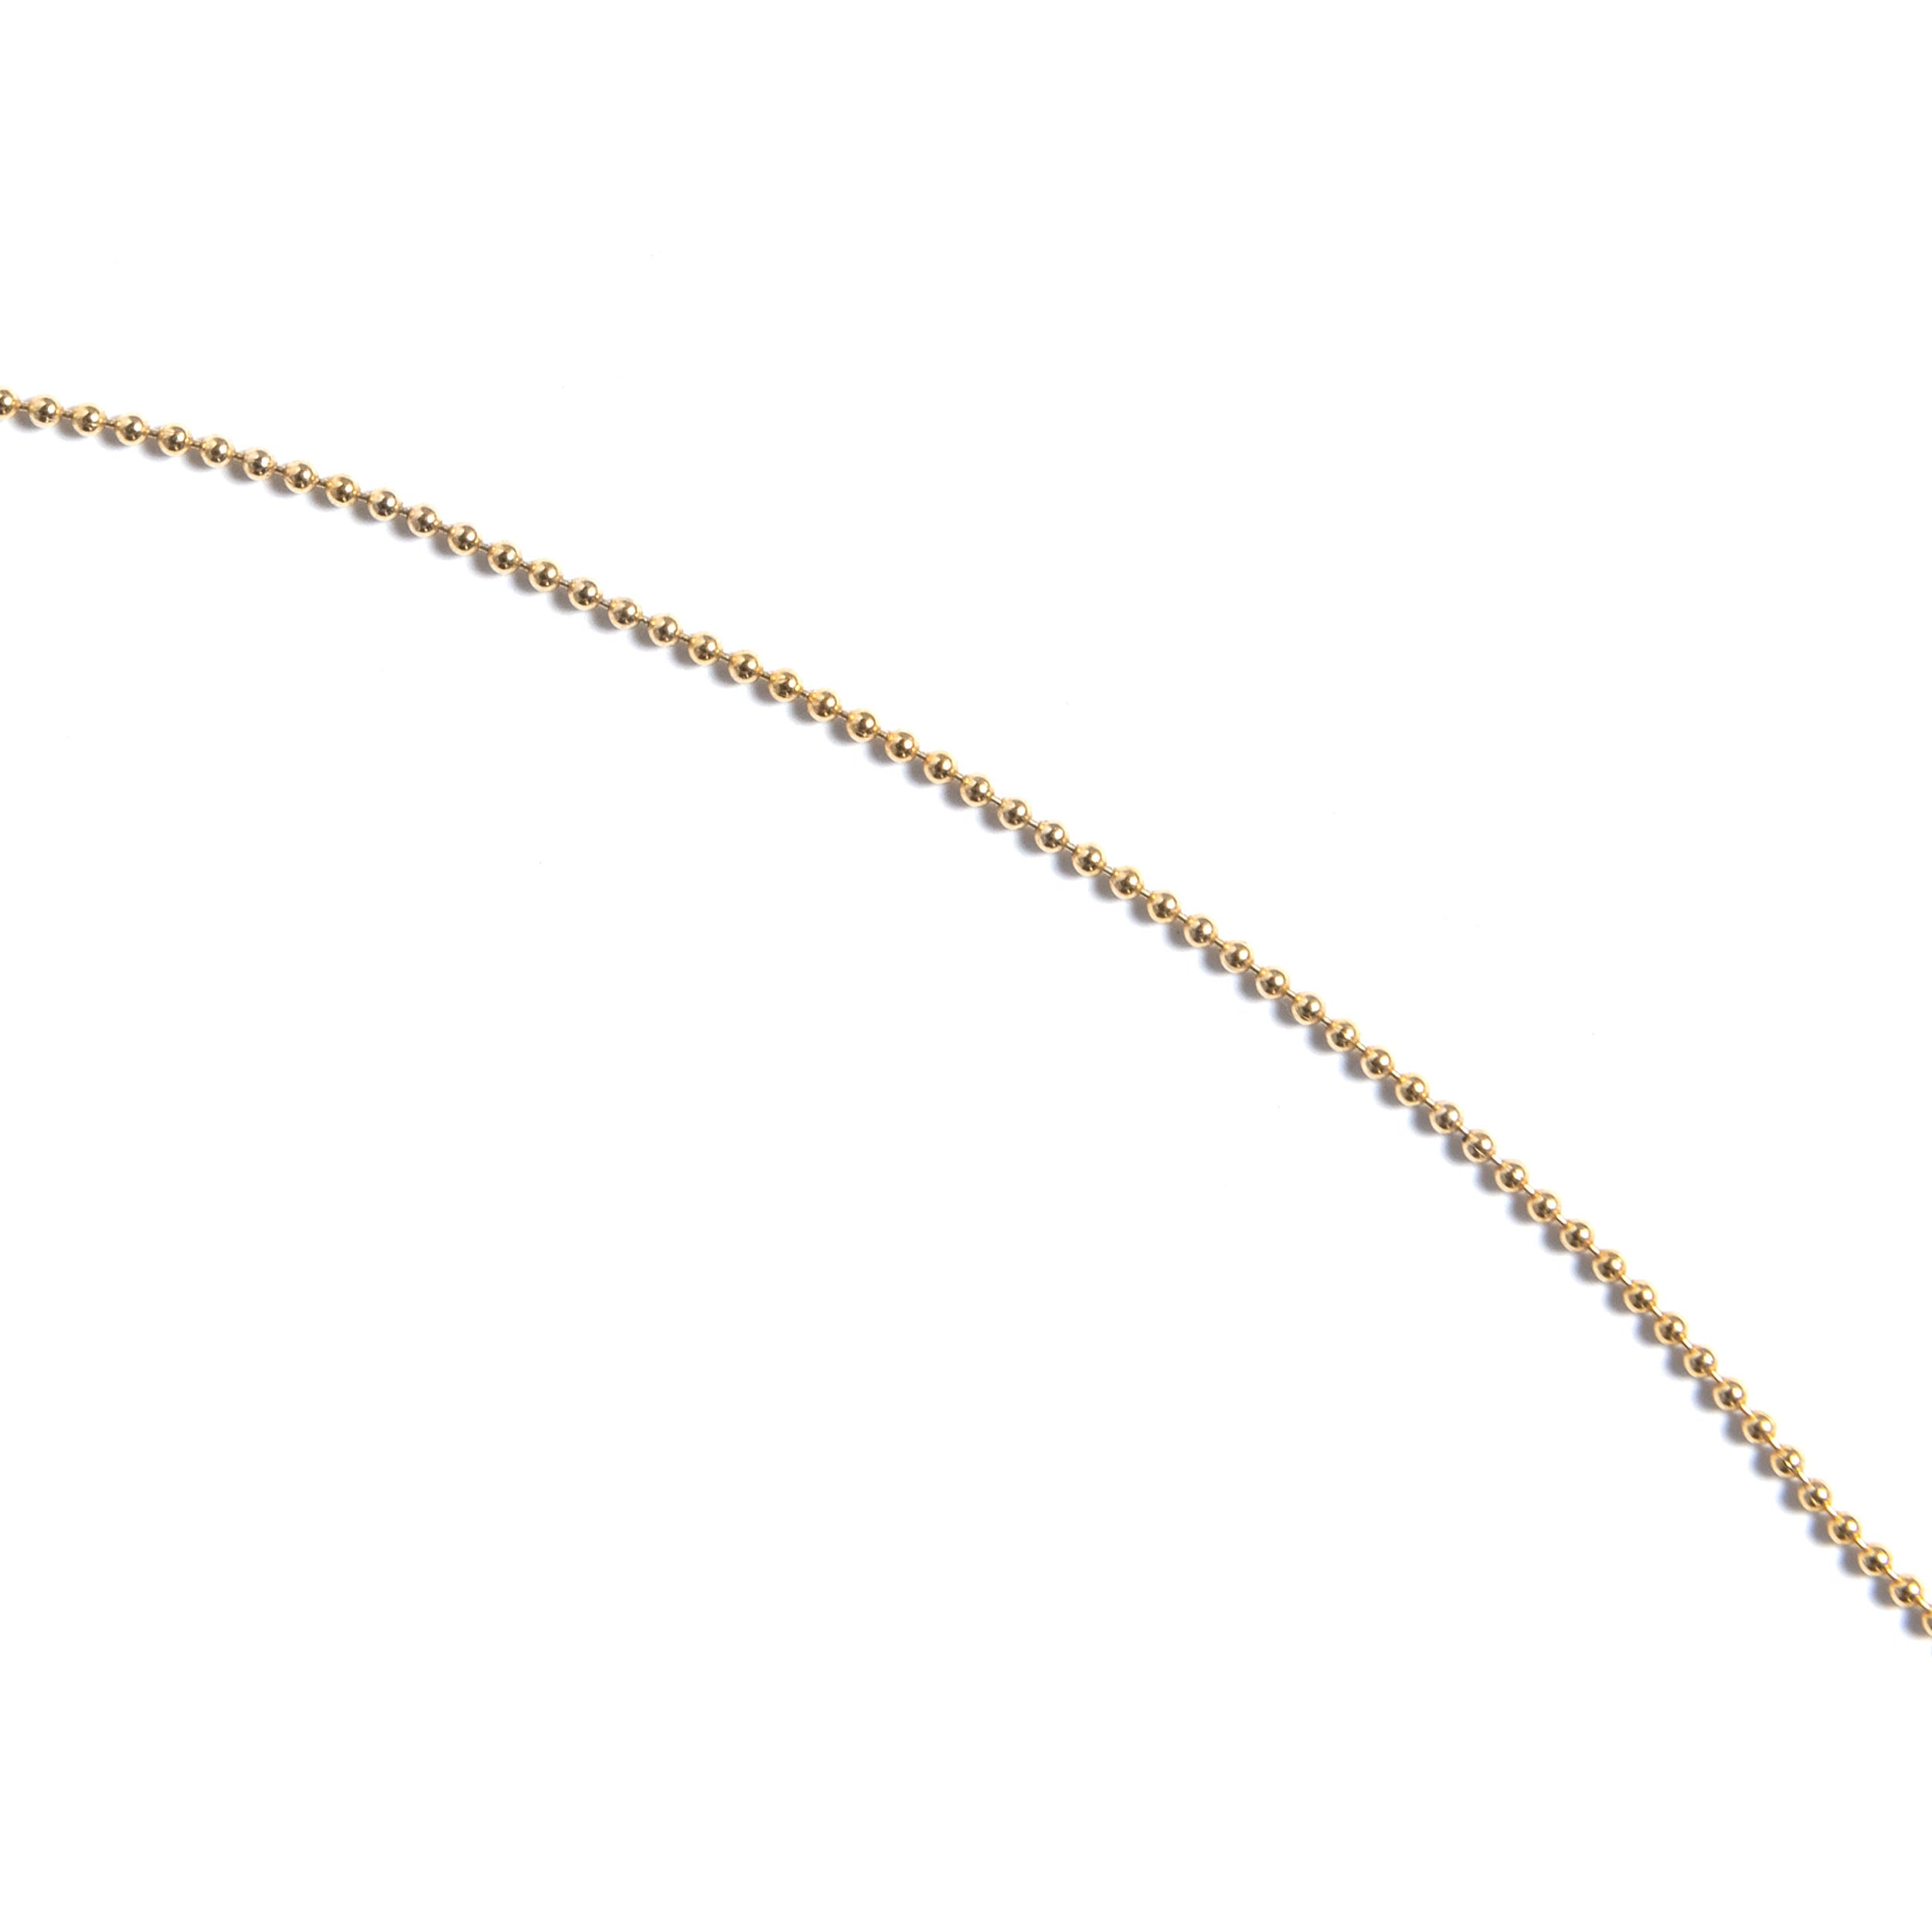 Ditto Tiny Ball Chain Necklace - Favor Jewelry